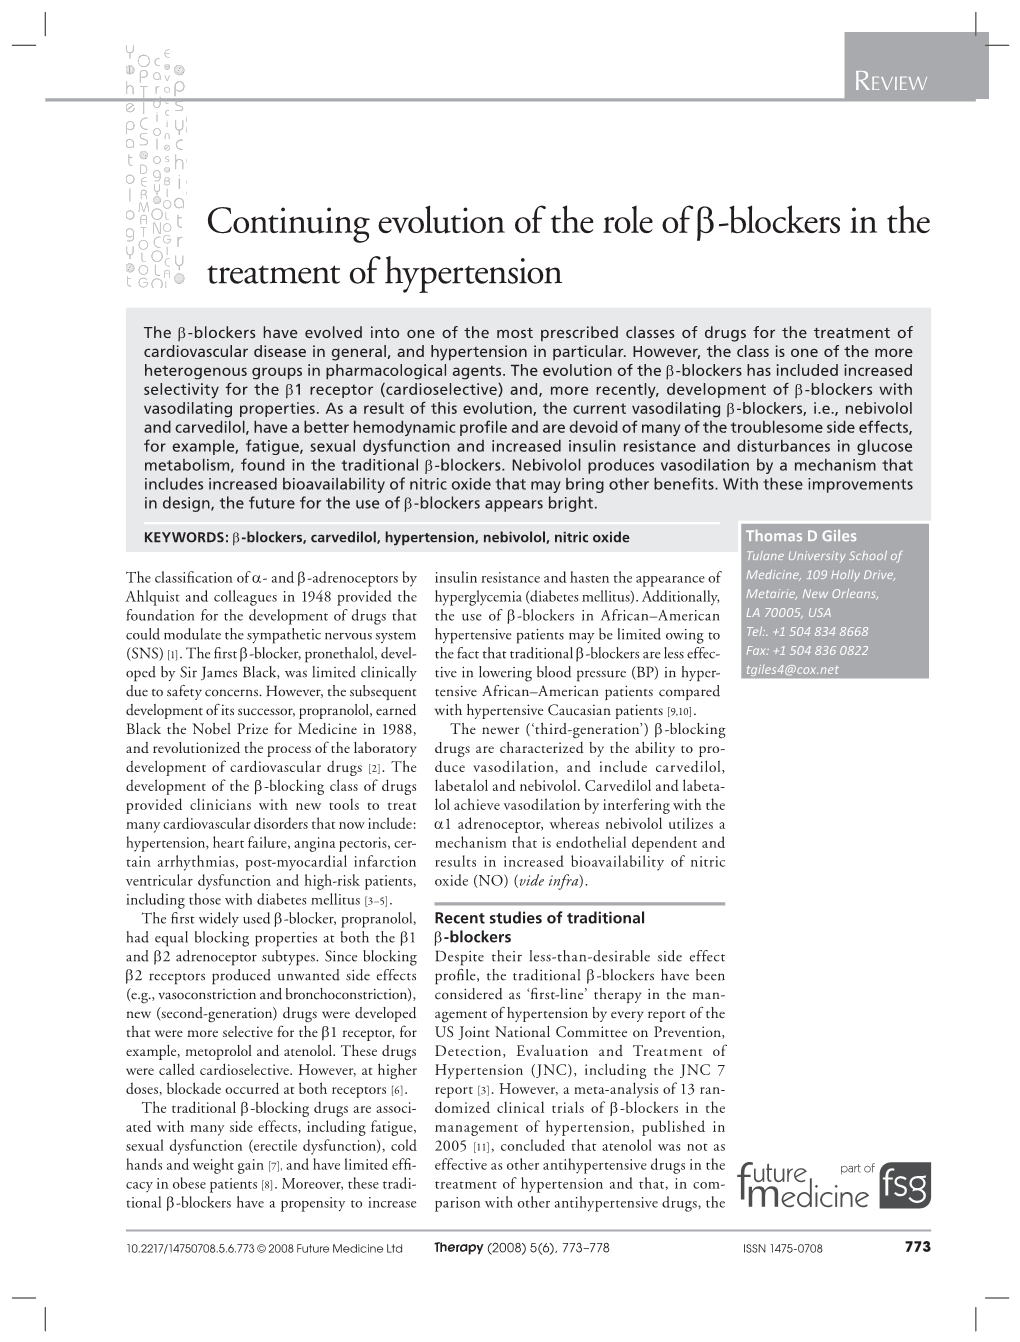 Continuing Evolution of the Role of Β-Blockers in the Treatment of Hypertension